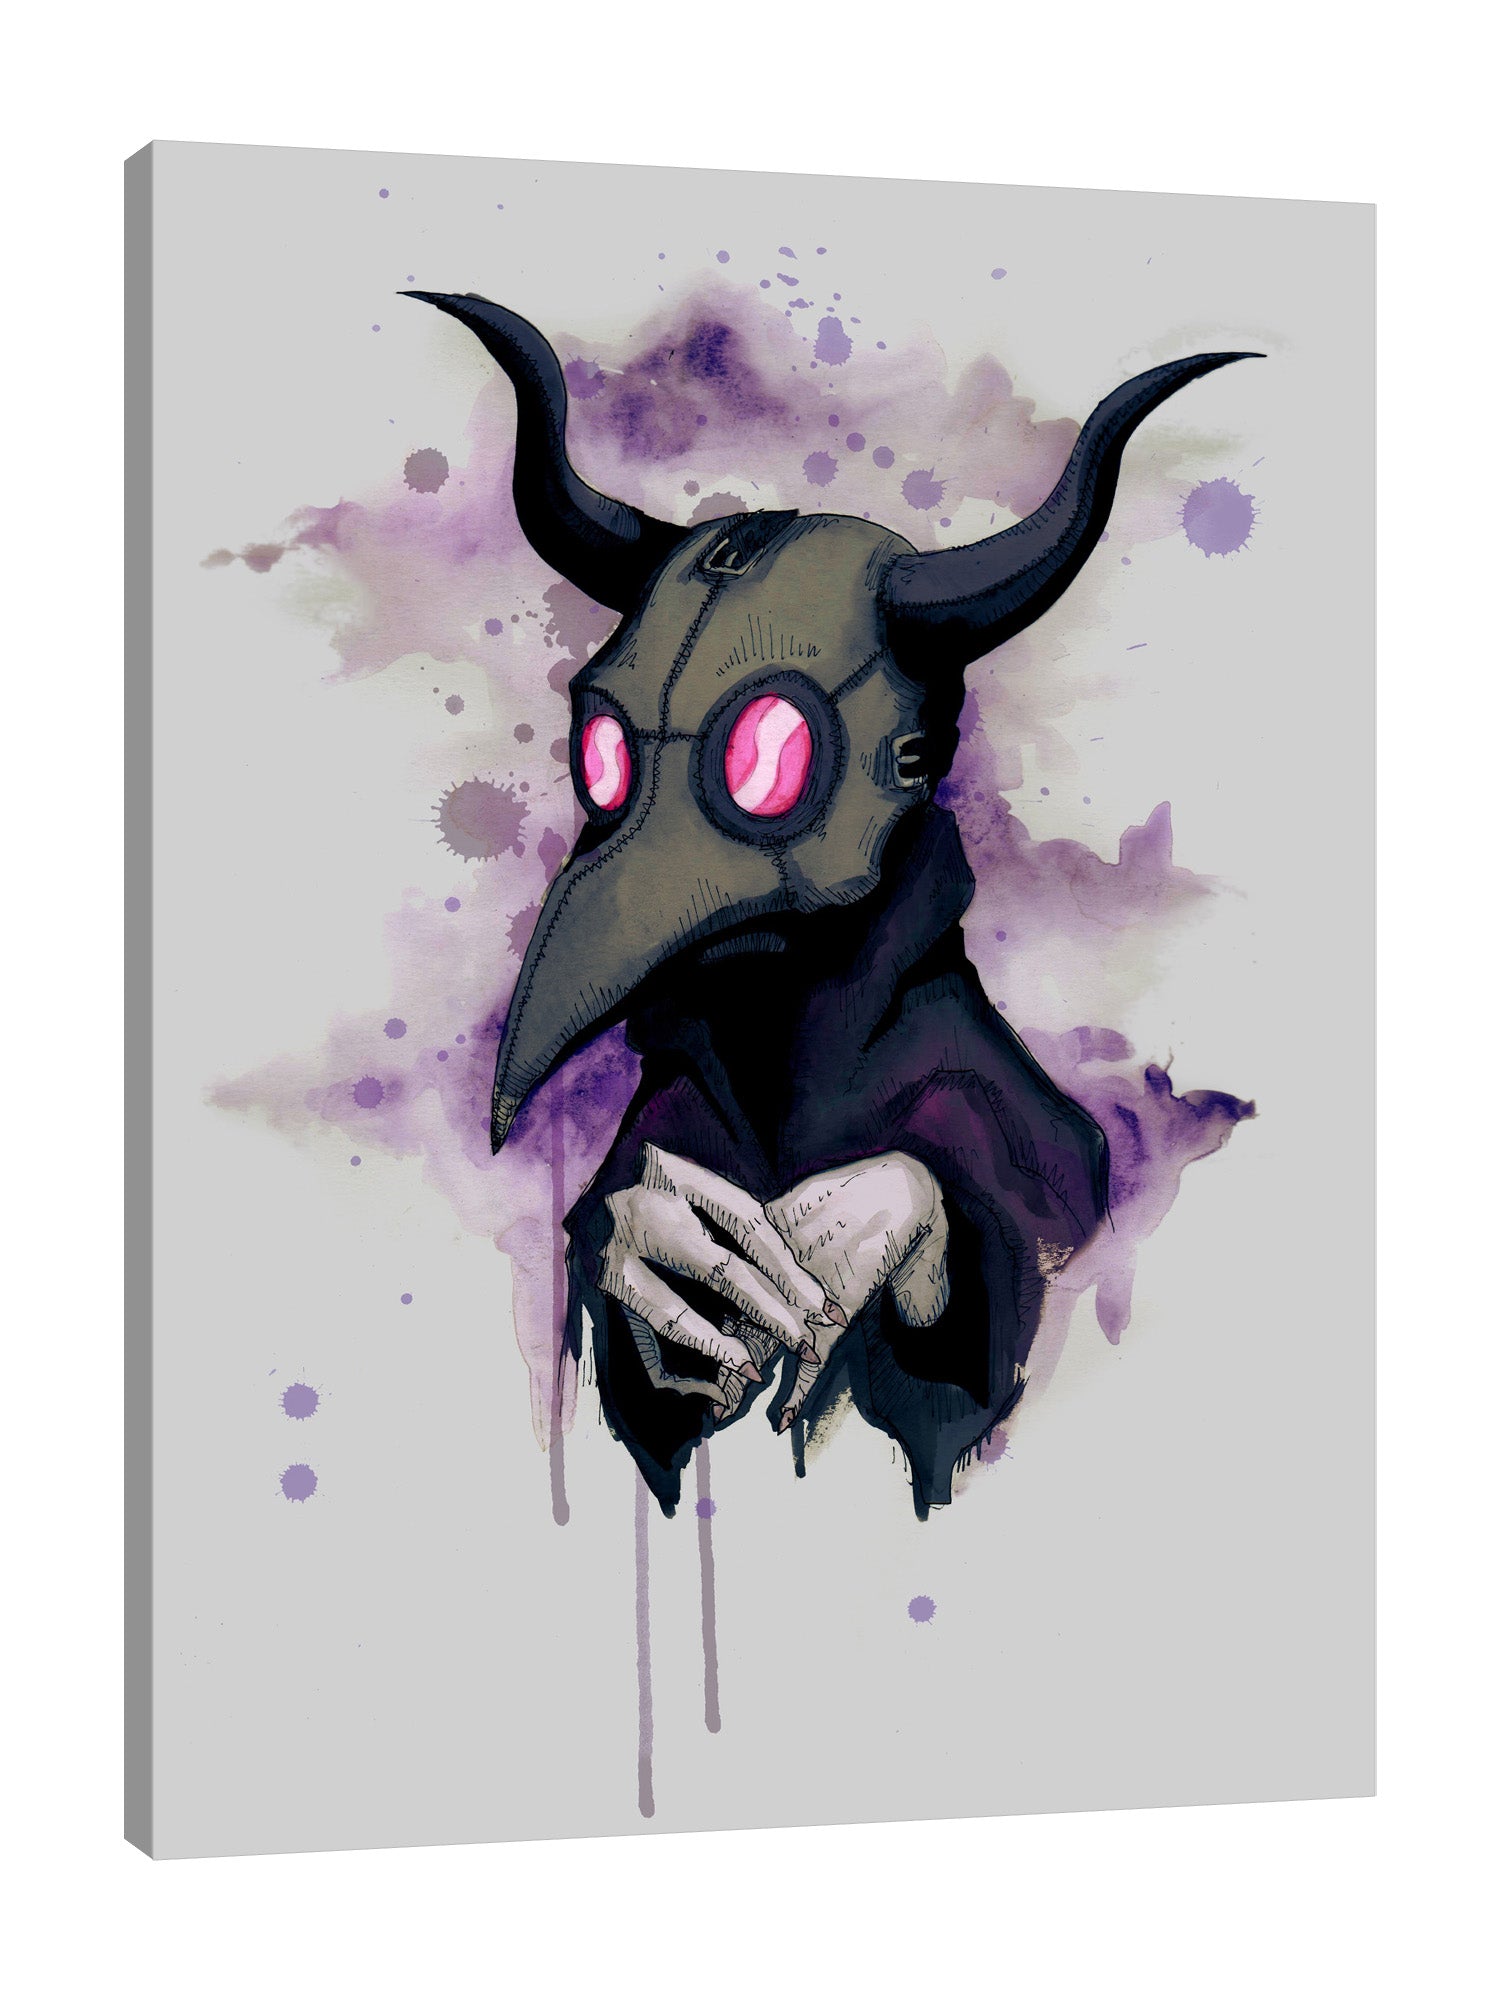 Ludwig-Van-Bacon,Vertical,3X4,Modern & Contemporary,People,Fantasy & Sci-Fi,Entertainment,plague,plague doctor,masks,mask,drips,drip,paint drip,paint drips,circle,circles,violet,pink,Mist Gray,Rose Red,Black,Gray